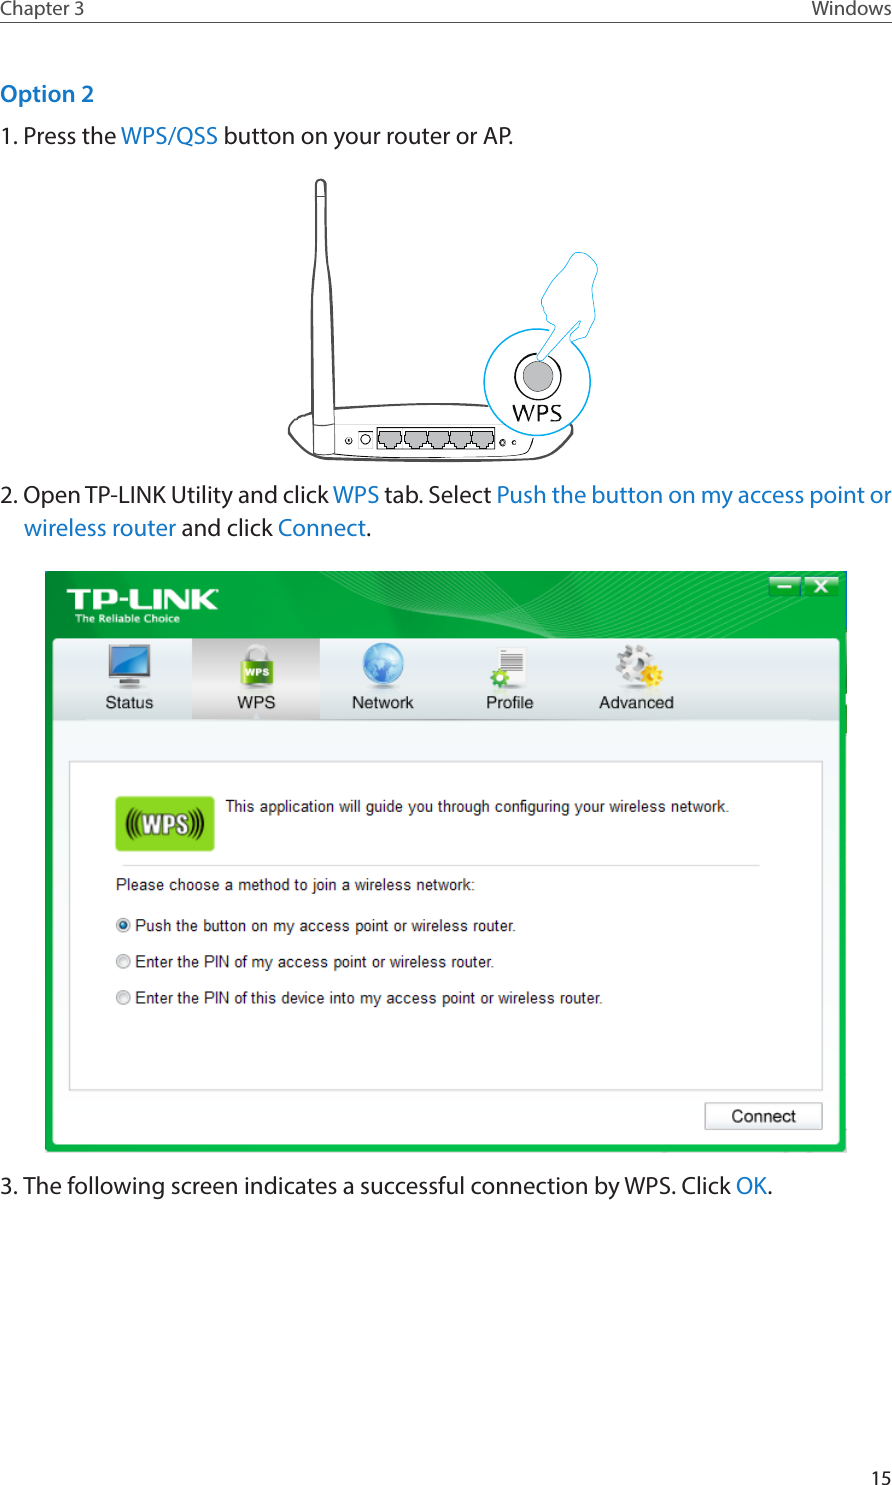 15Chapter 3 WindowsOption 21. Press the WPS/QSS button on your router or AP.2. Open TP-LINK Utility and click WPS tab. Select Push the button on my access point or wireless router and click Connect.3. The following screen indicates a successful connection by WPS. Click OK.